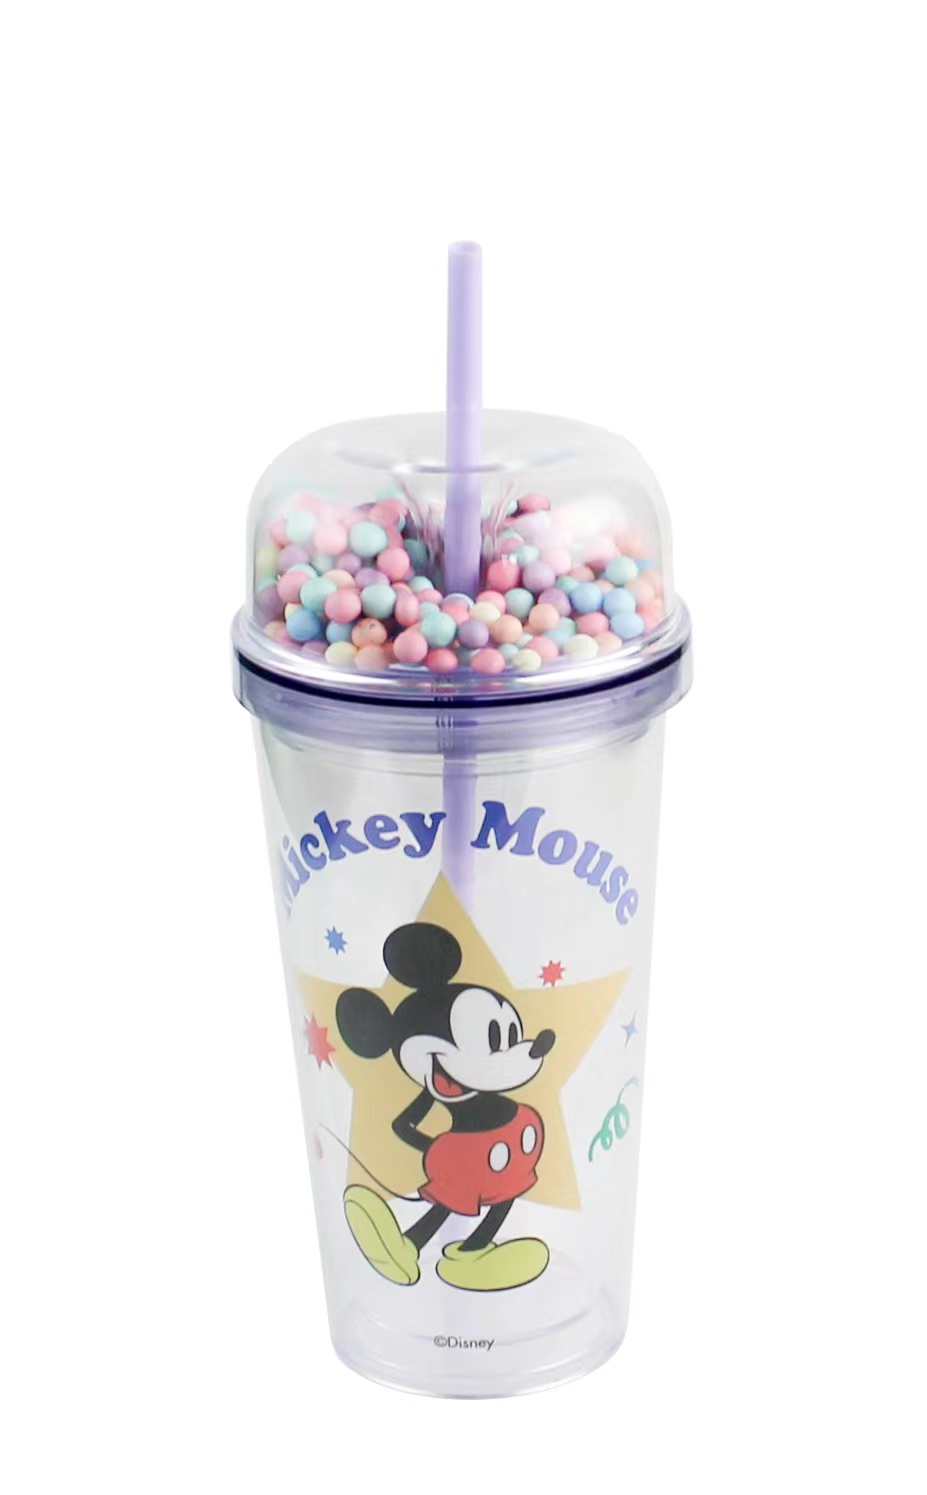 Miniso Disney`s 100th Anniversary Celebration Series Mickey Mouse Ceramic  Cup with Lid And Spoon 360ml